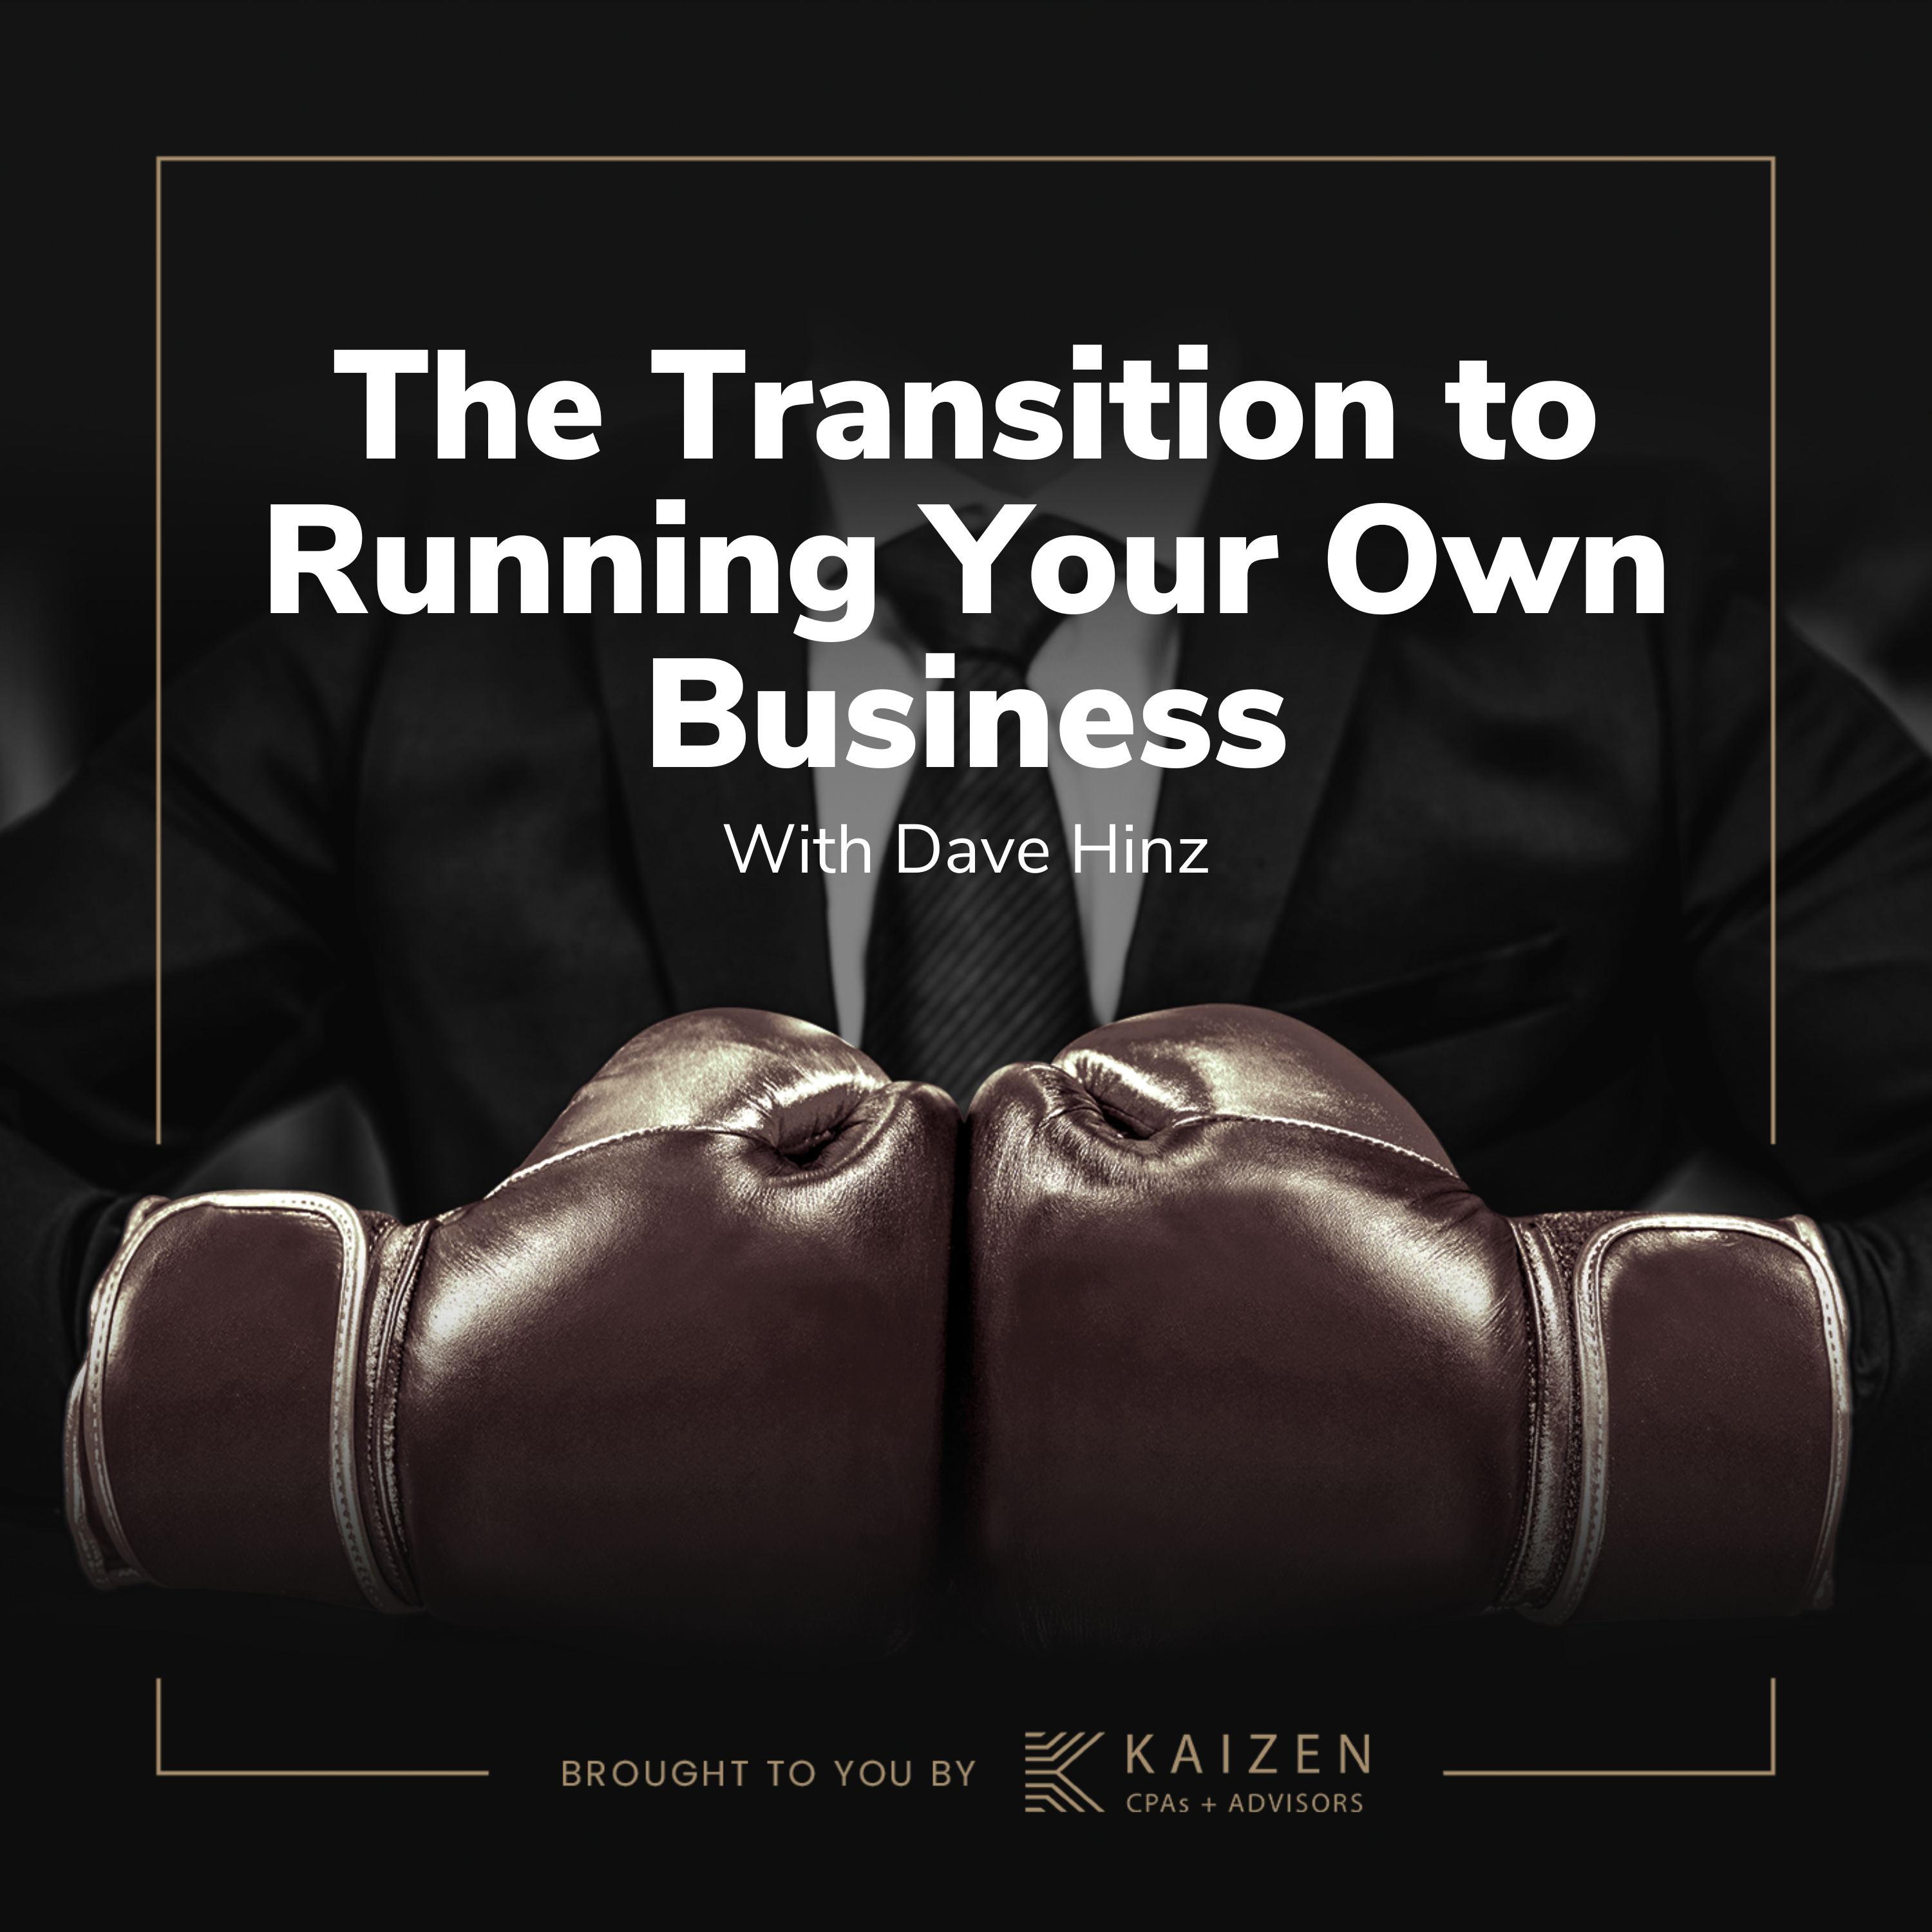 The Transition to Running Your Own Business